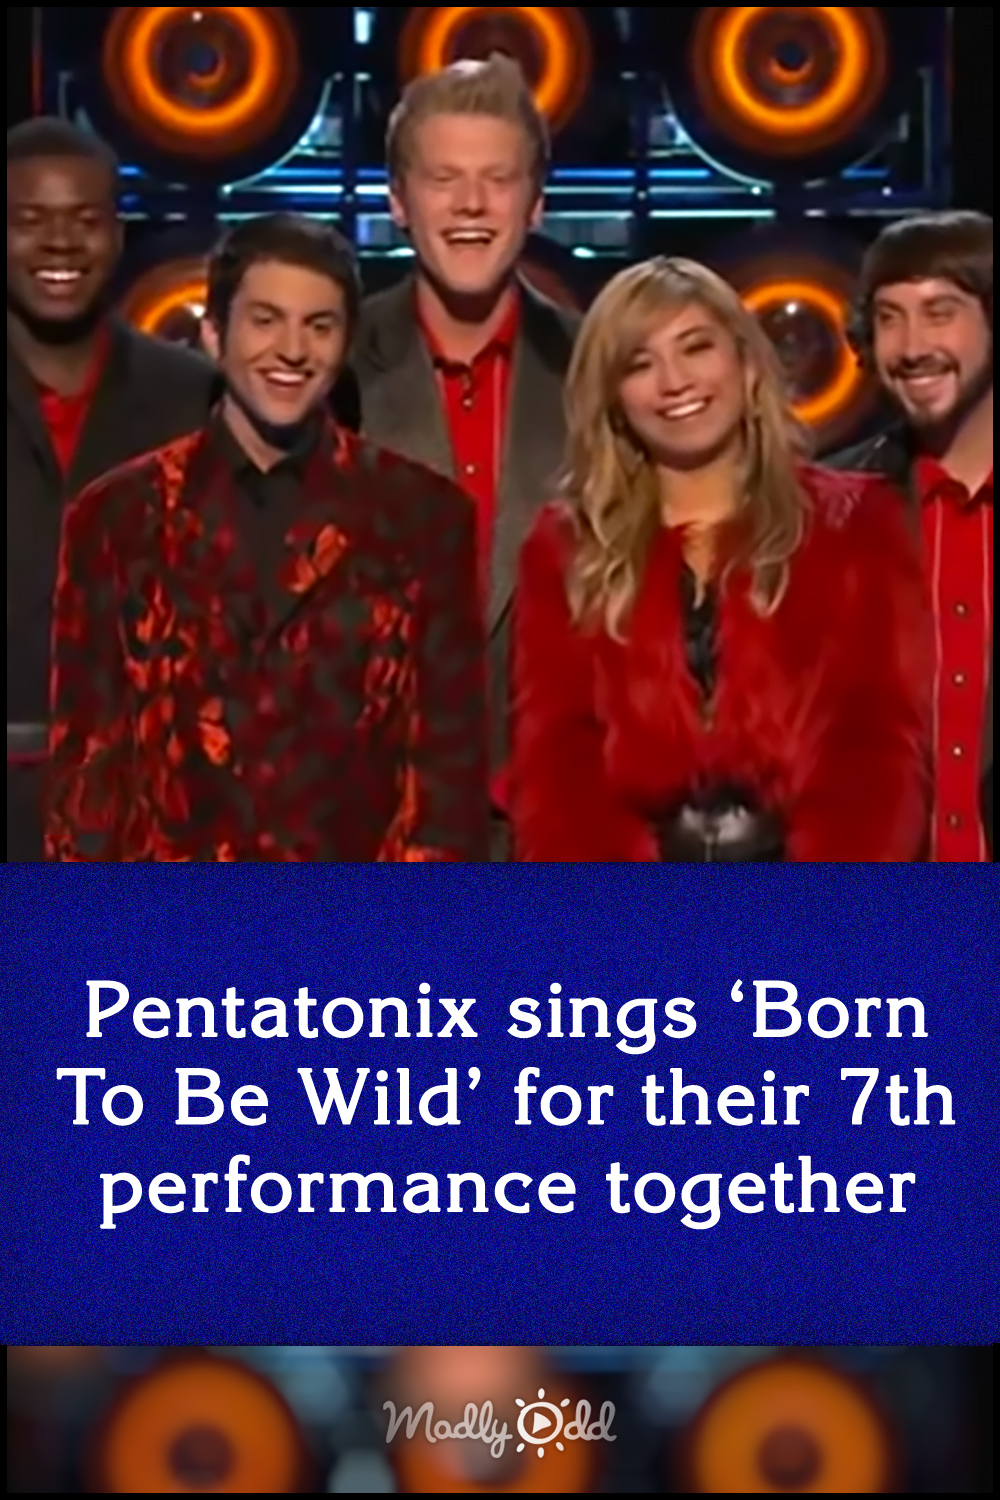 Pentatonix sings ‘Born To Be Wild’ for their 7th performance together